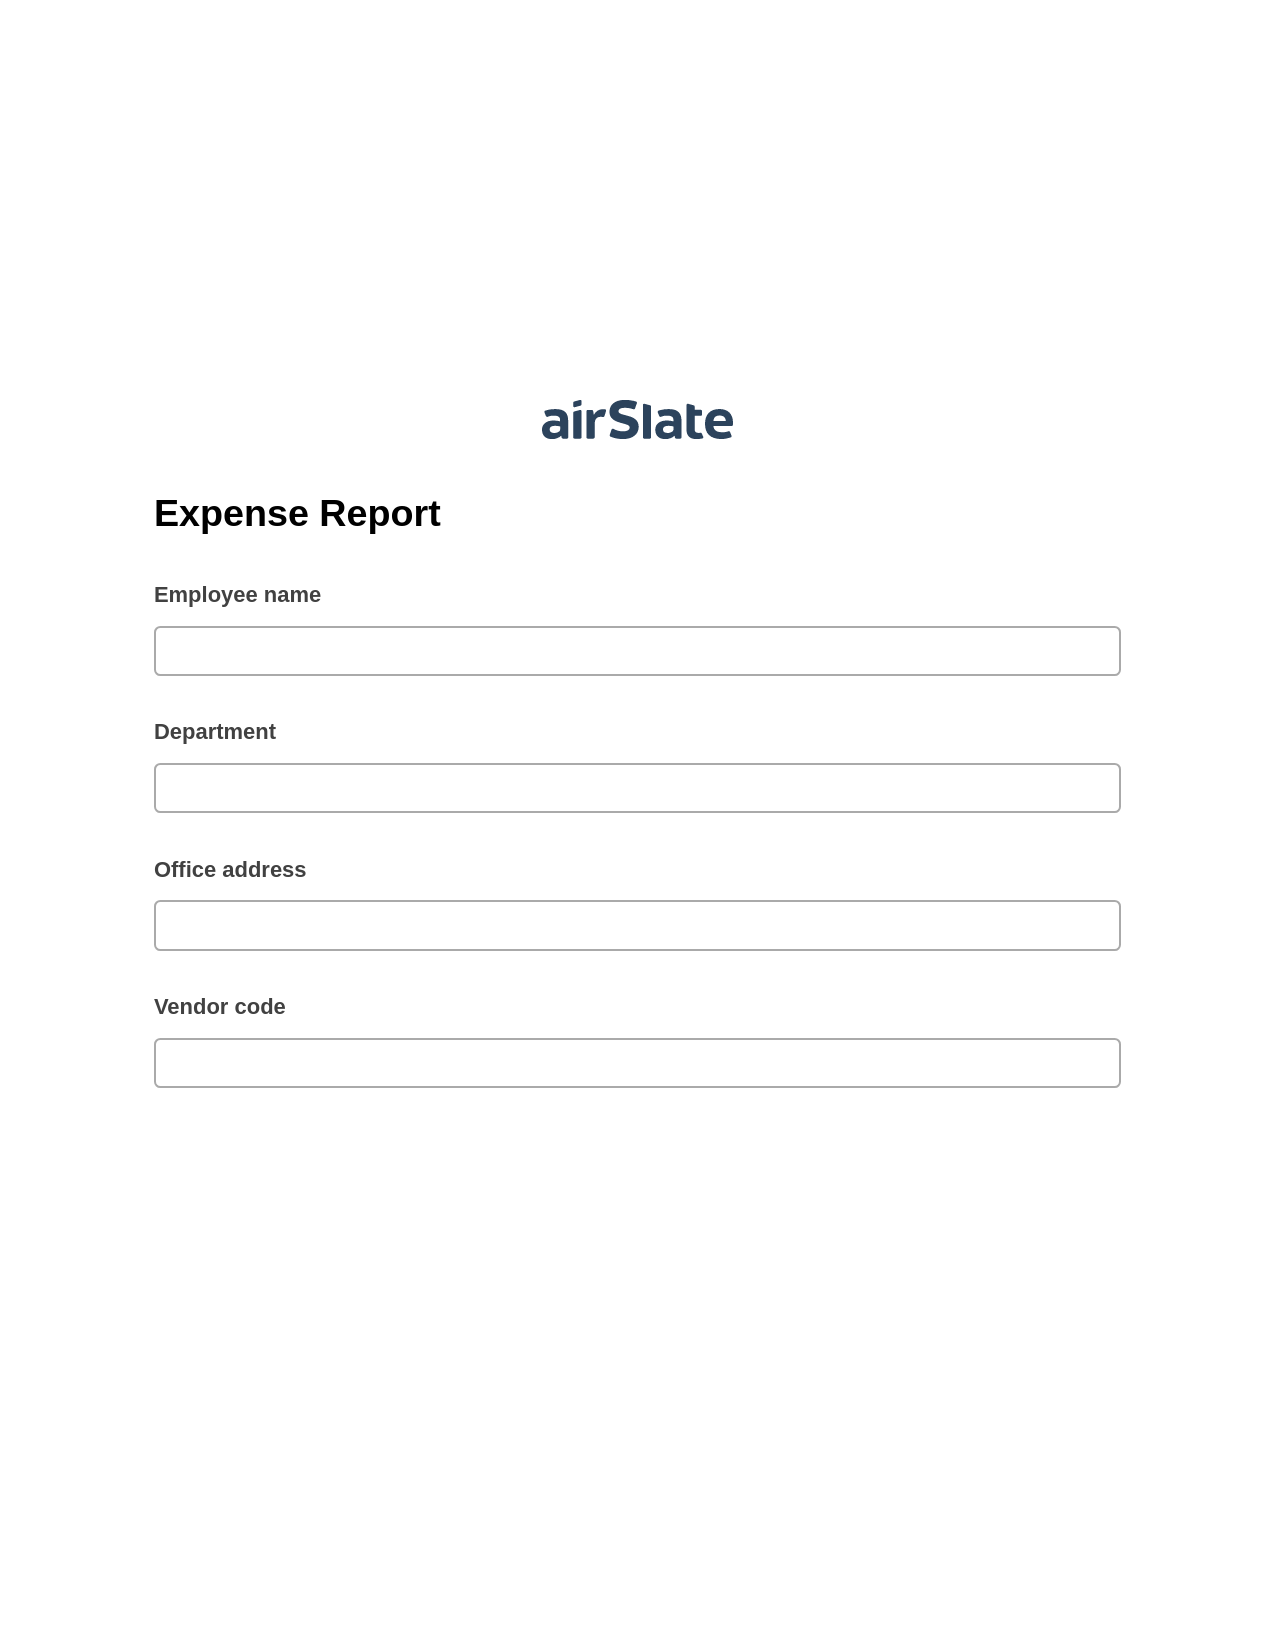 Multirole Expense Report Pre-fill from CSV File Bot, Hide Signatures Bot, Export to Excel 365 Bot